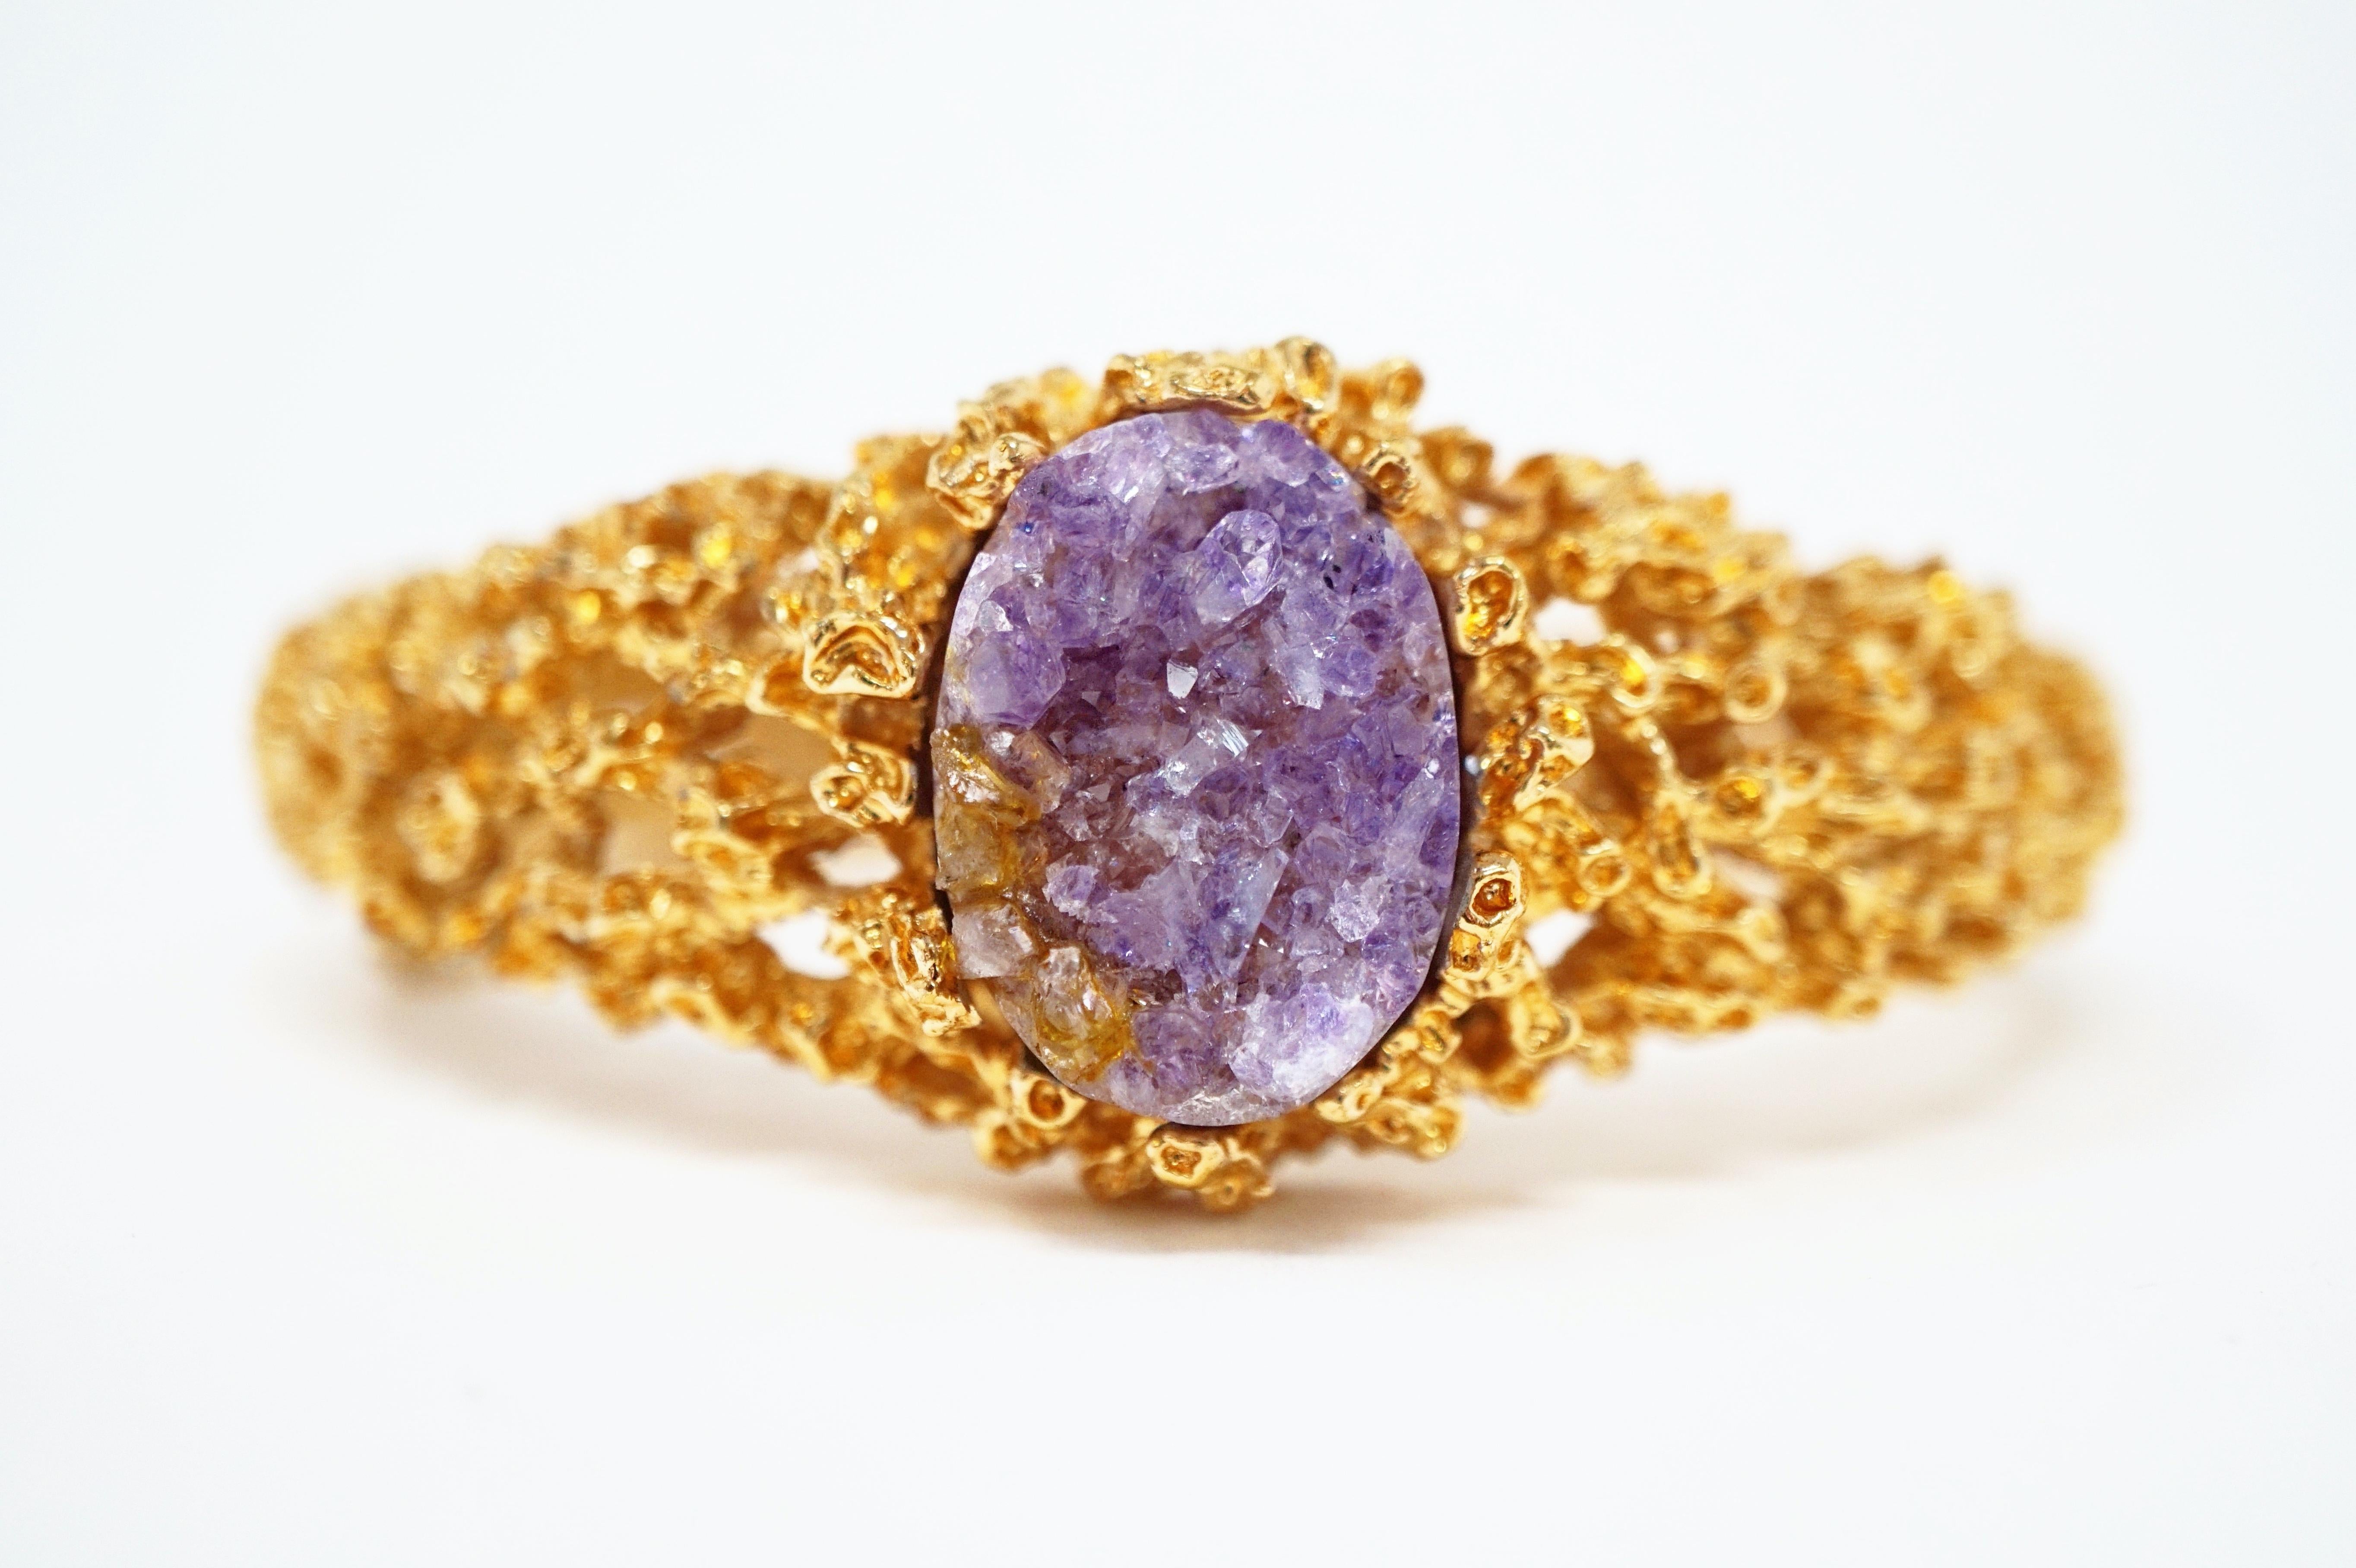 Exquisite gilt Brutalist-style abstract modern bracelet with Amethyst gemstone centerpiece by Panetta, circa 1960.  

ABOUT PANETTA:
Panetta was created in 1945 in New York by Beneditto Panetta, a jeweler from Naples, Italy. Panetta is a very